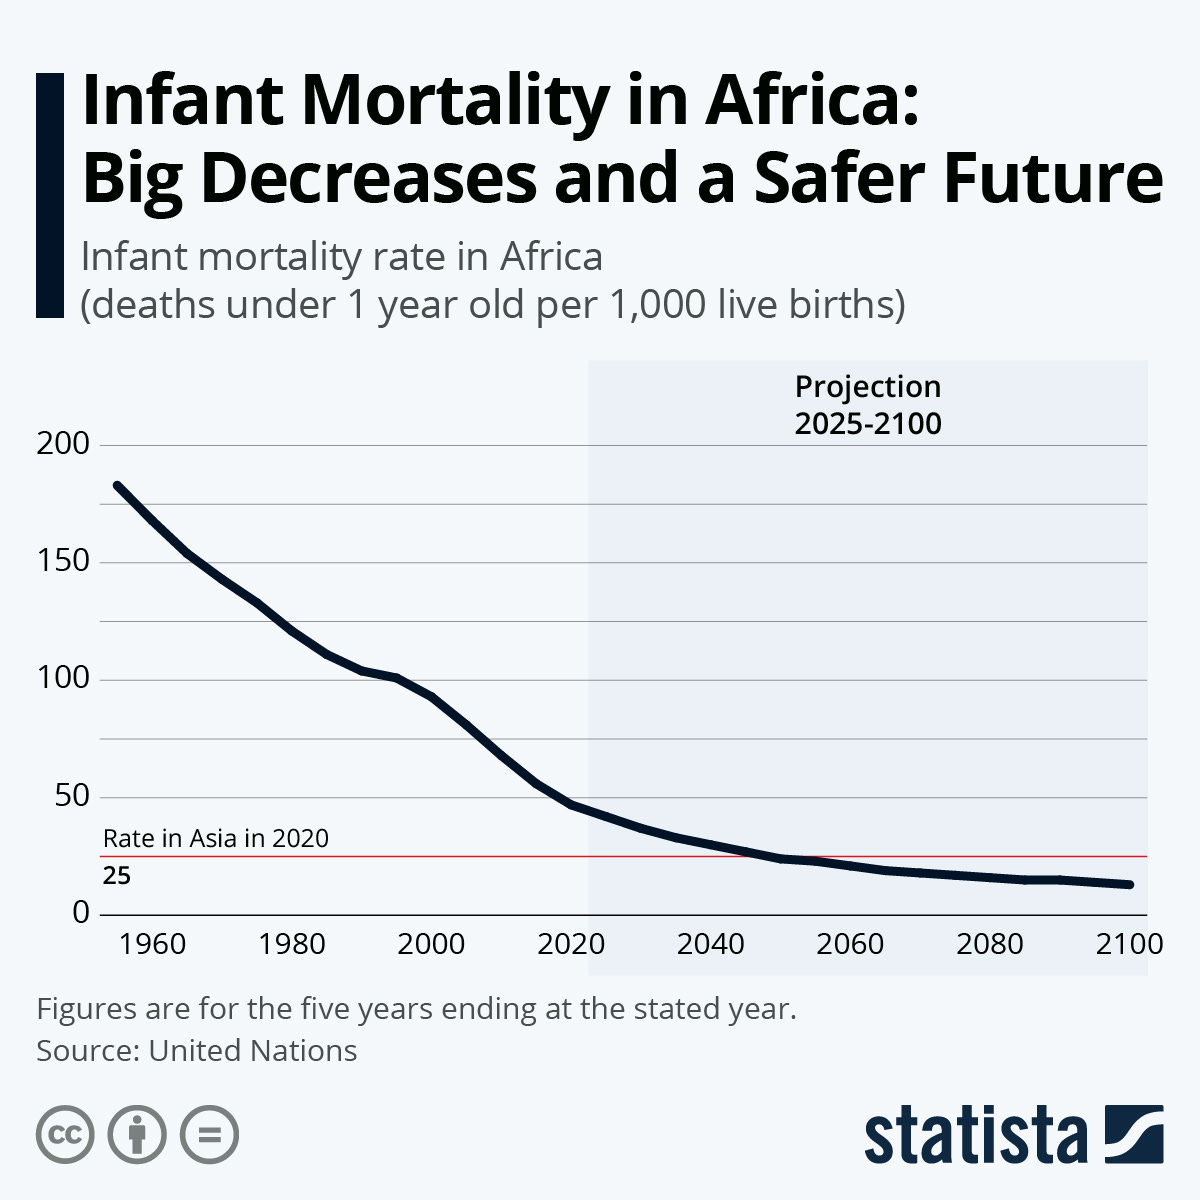 Infant Mortality in Africa: Big Decreases and a Safer Future